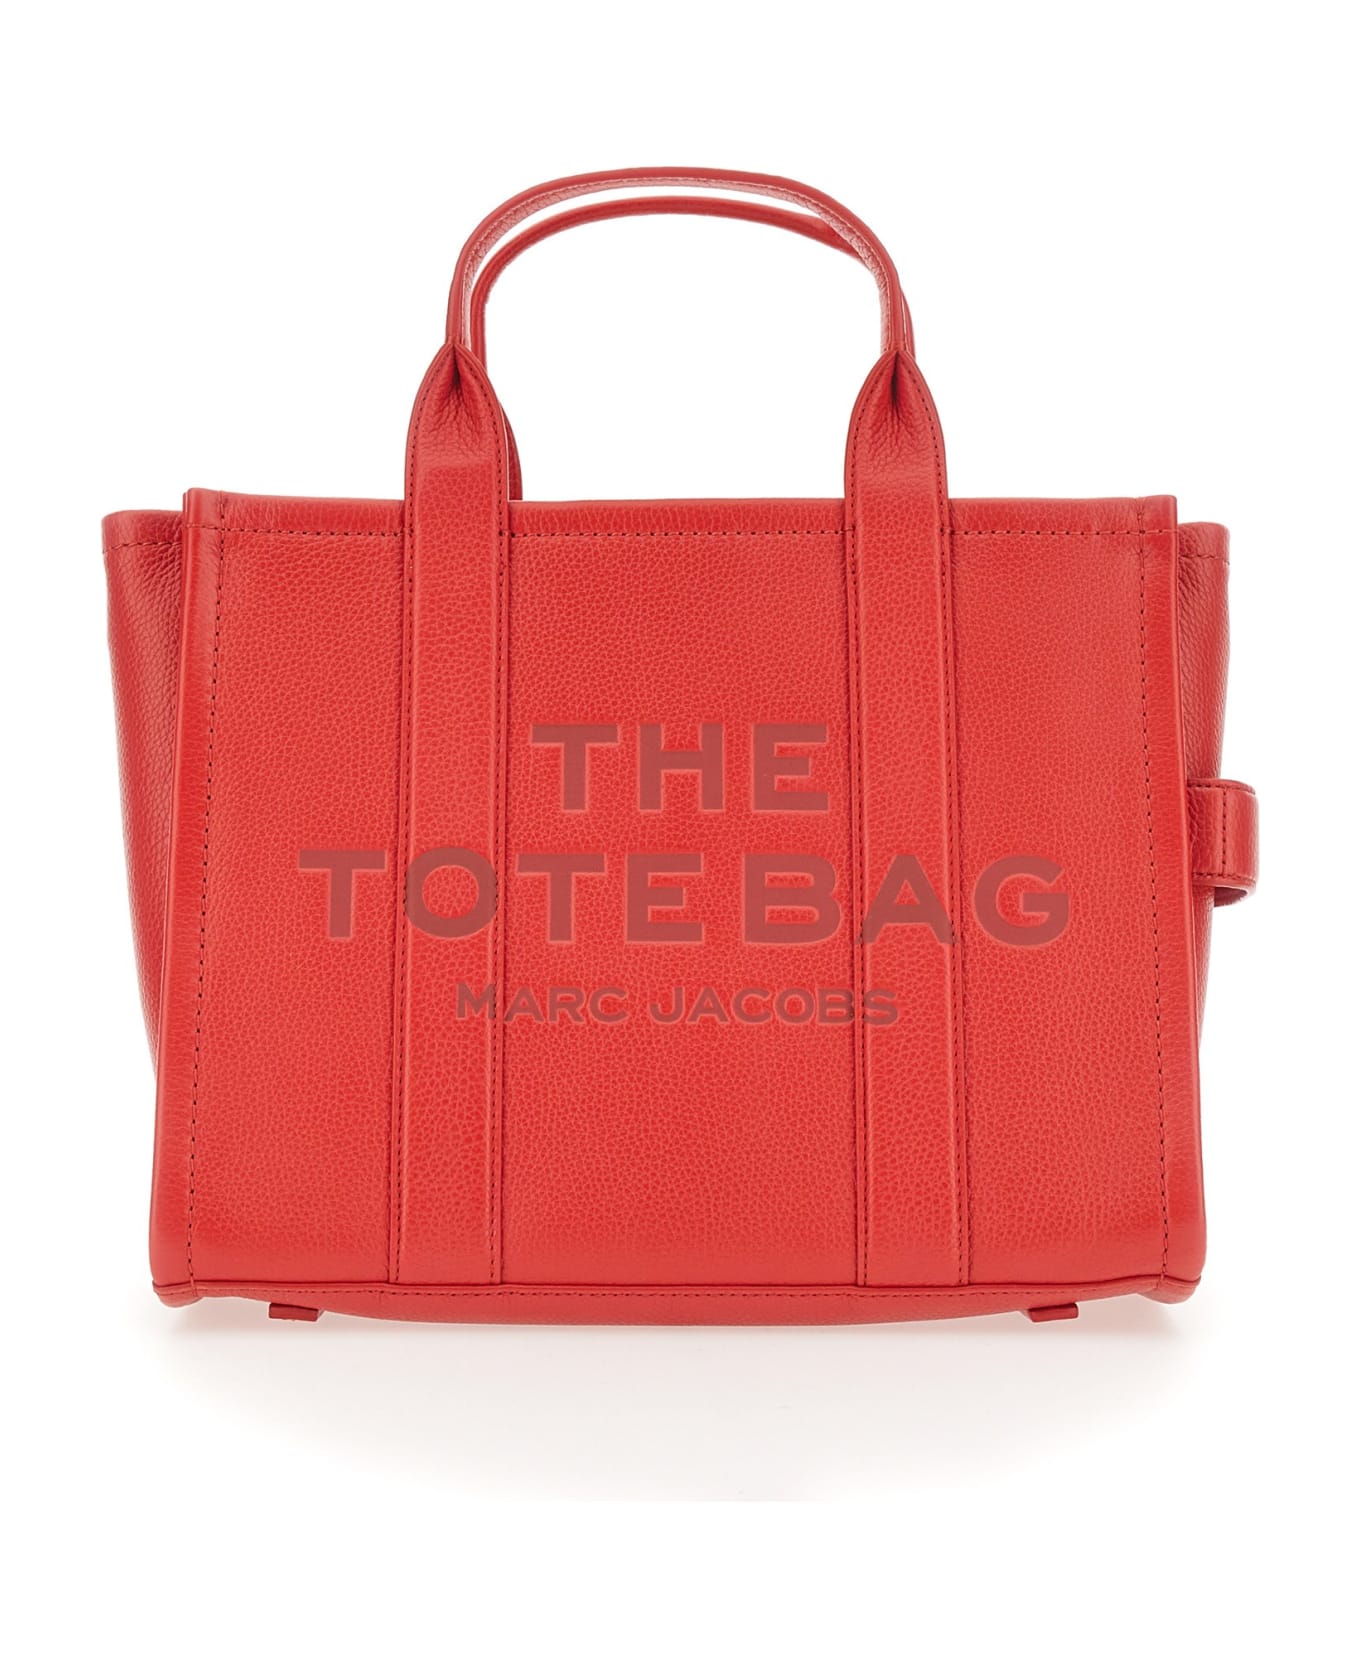 Marc Jacobs The Leather Medium Tote Bag - ROSSO